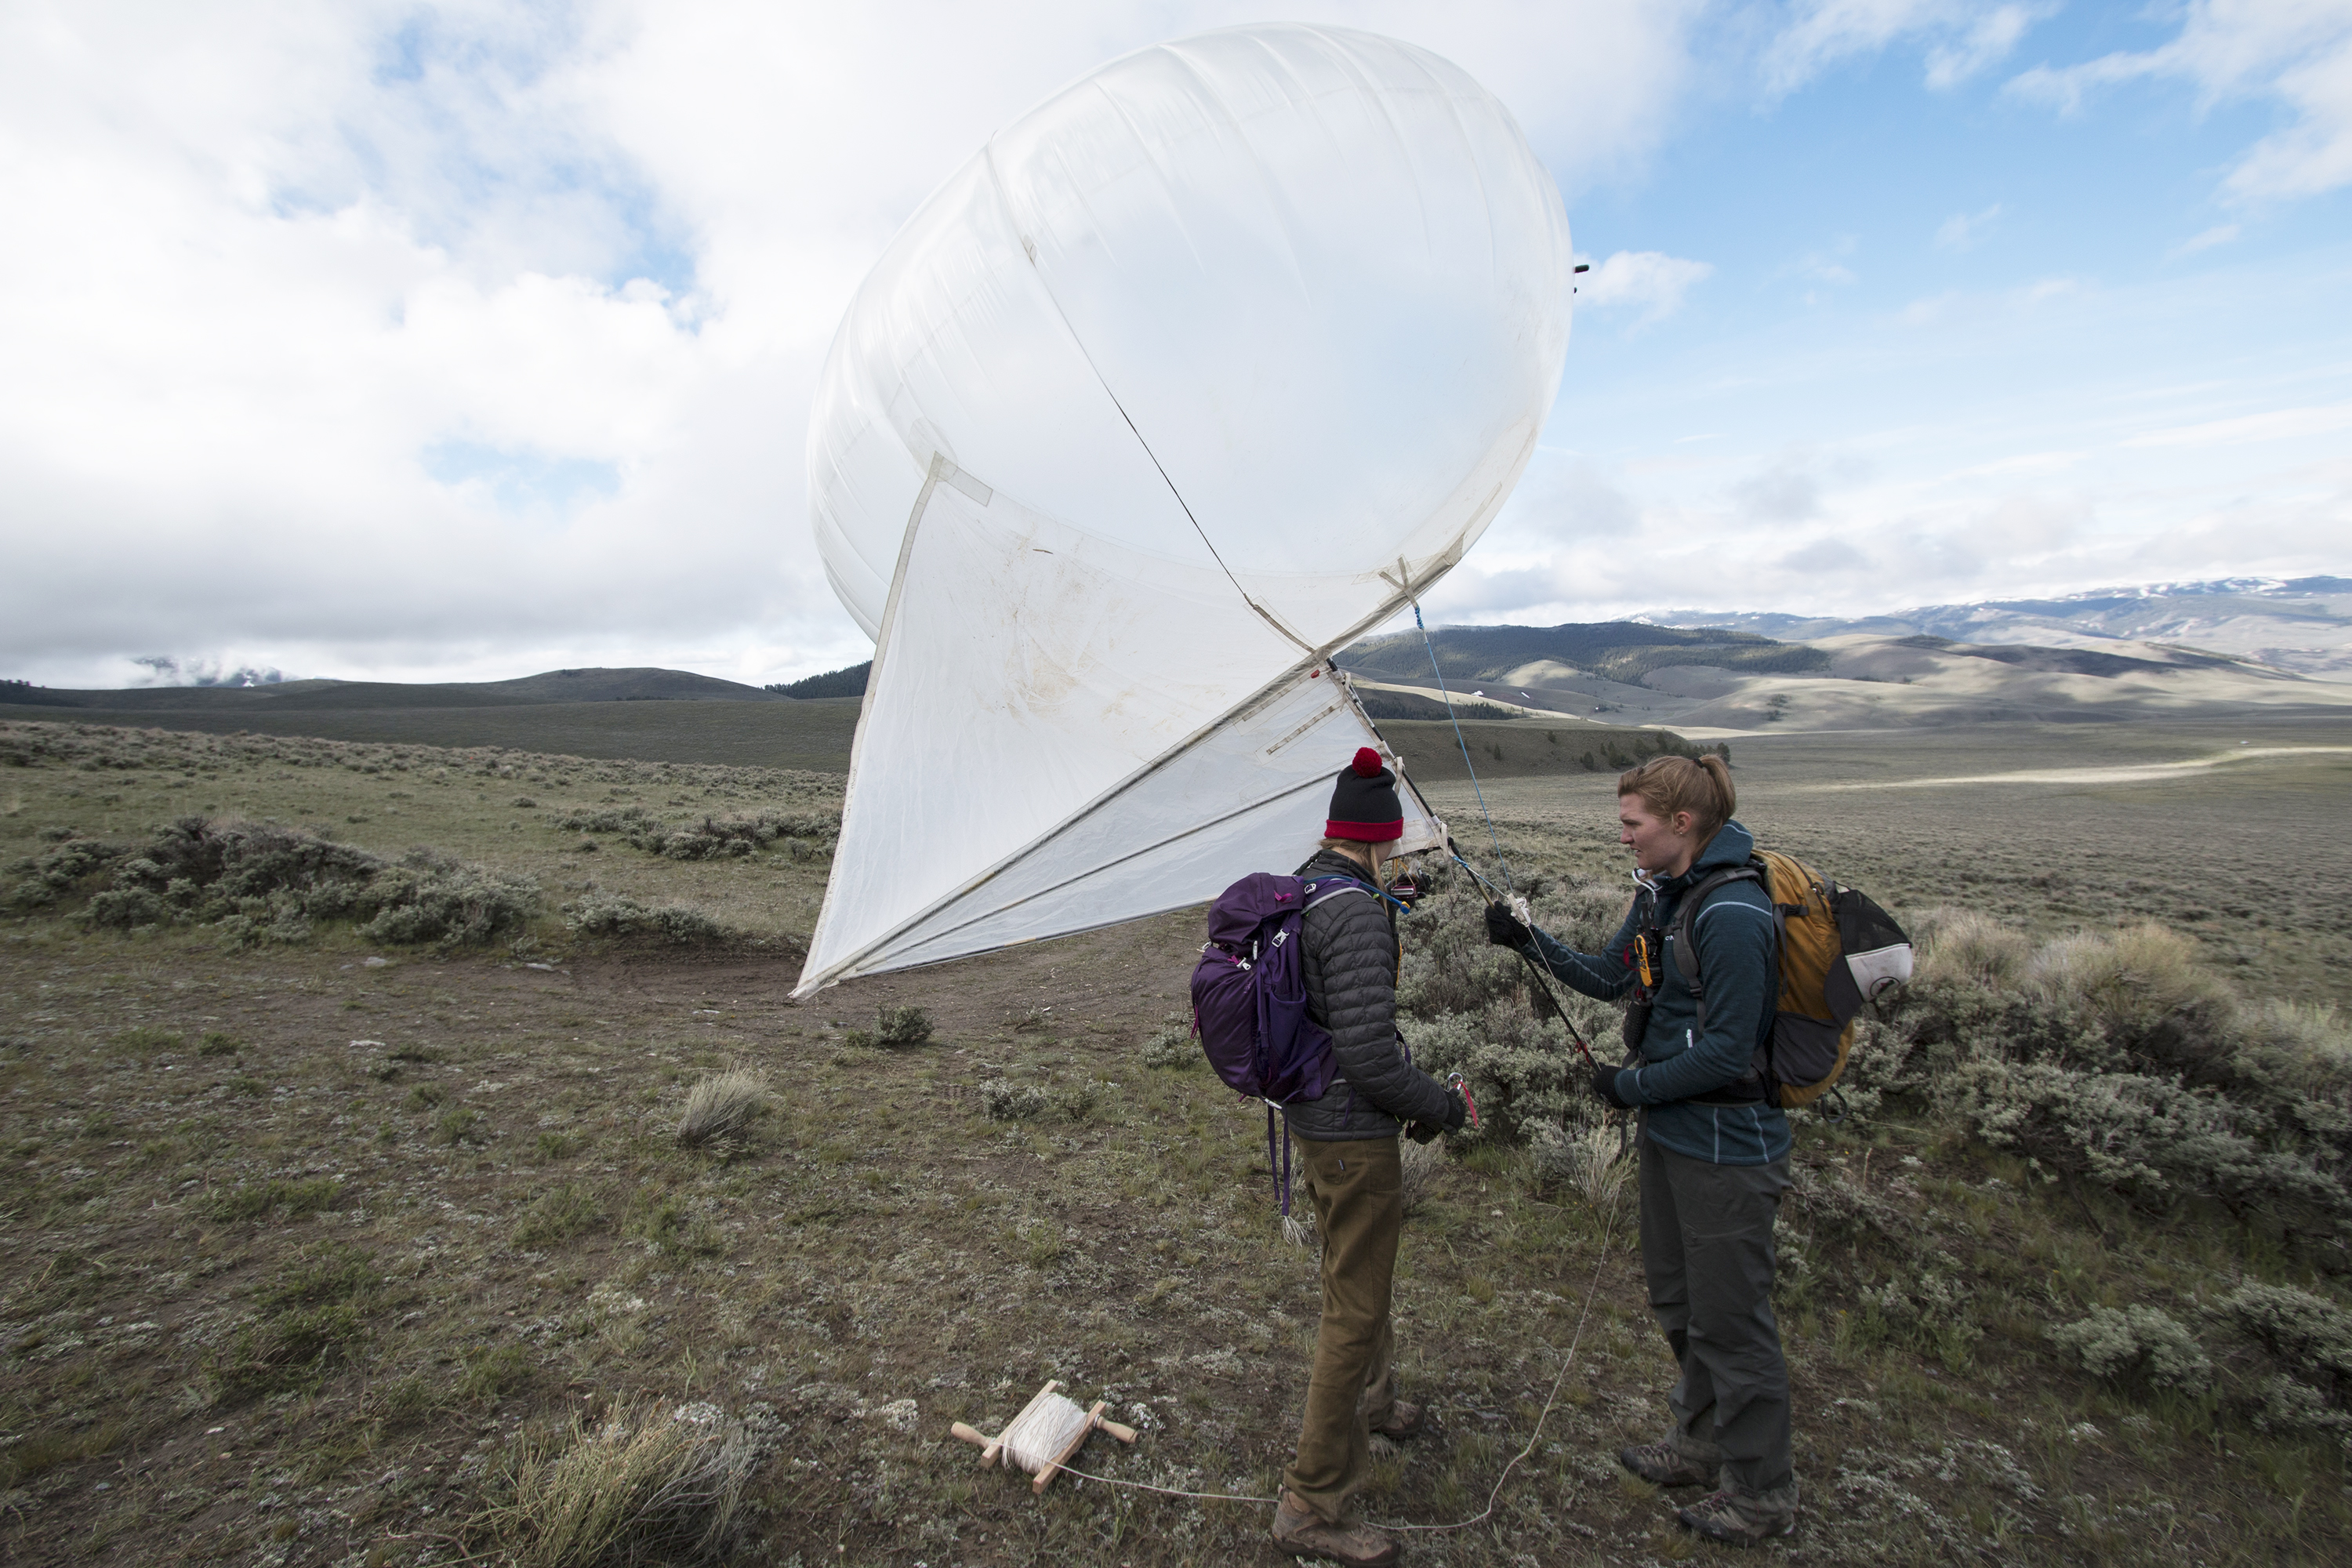 Colorado School of Mines graduate students Kendra Johnson and Lia Lajoie prepare a helikite (tethered balloon) to launch for the collection of photographs along the 1983 Borah Peak earthquake rupture.